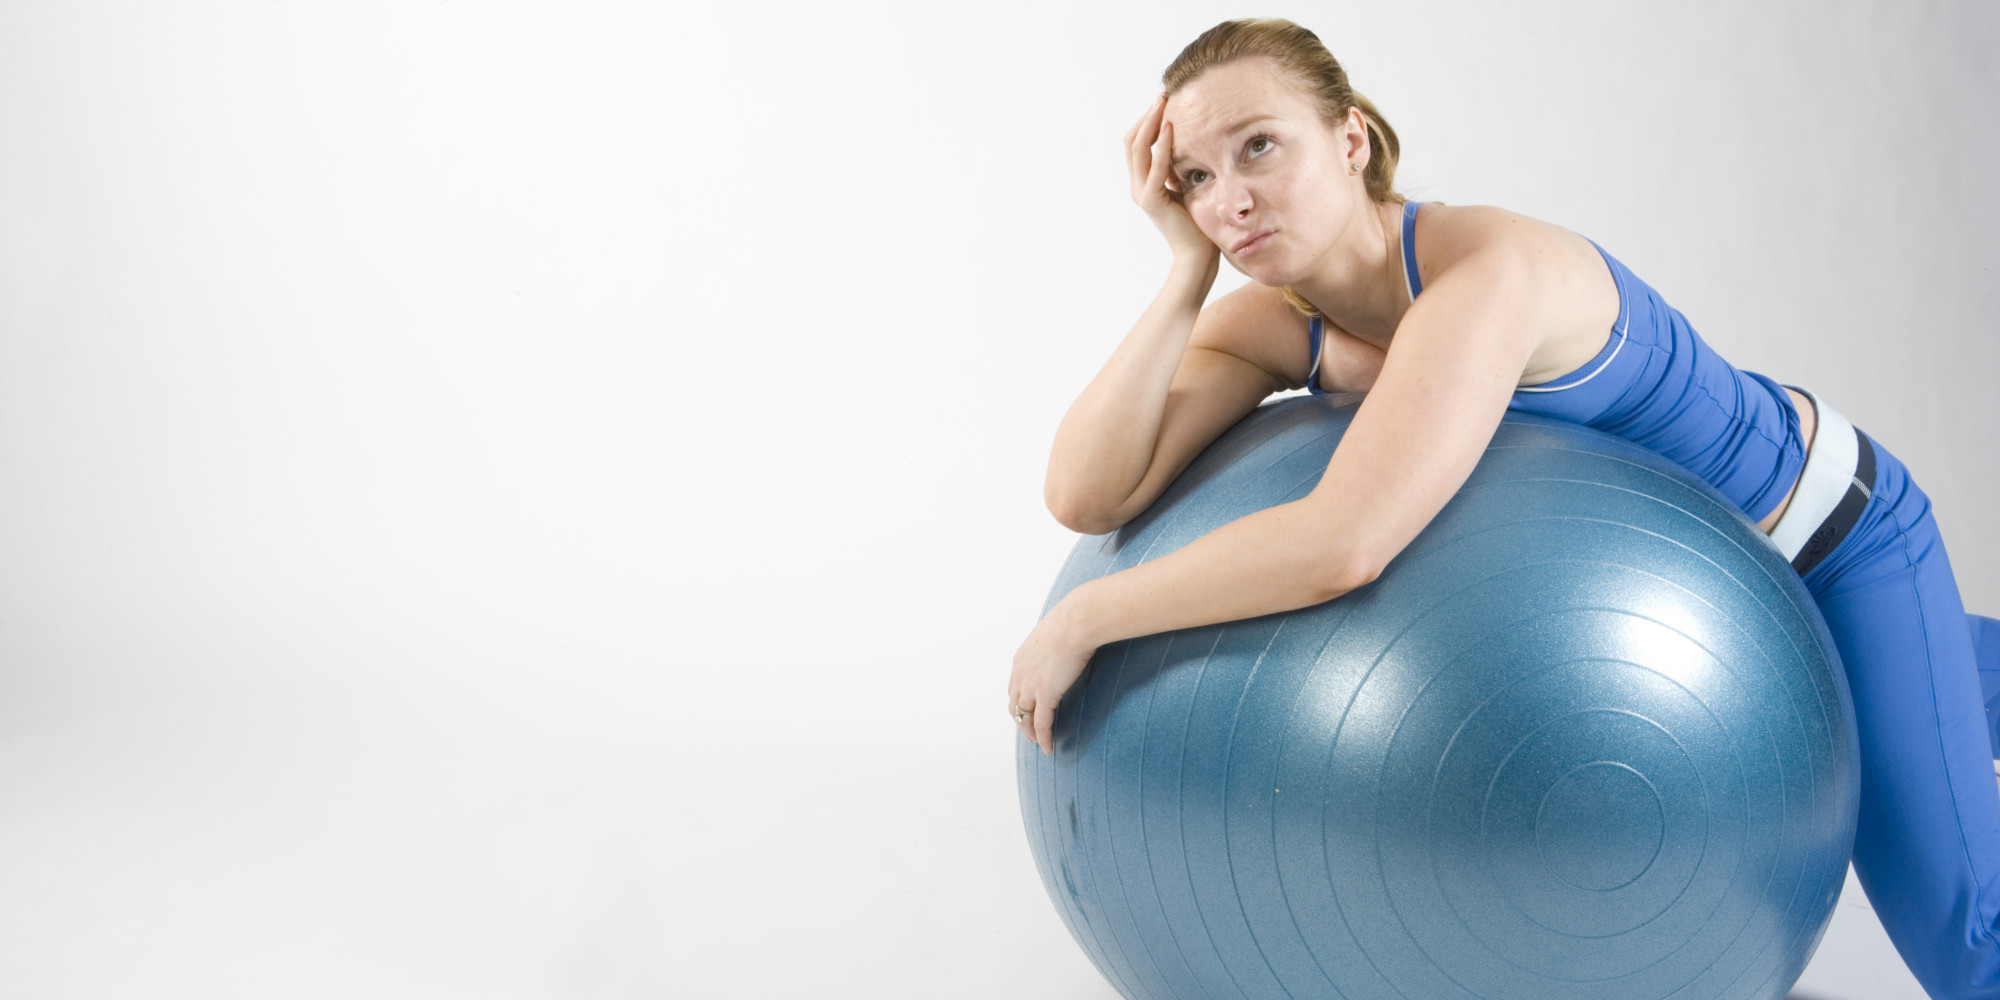 4 Ways to Use an Exercise Ball for Beginners - wikiHow